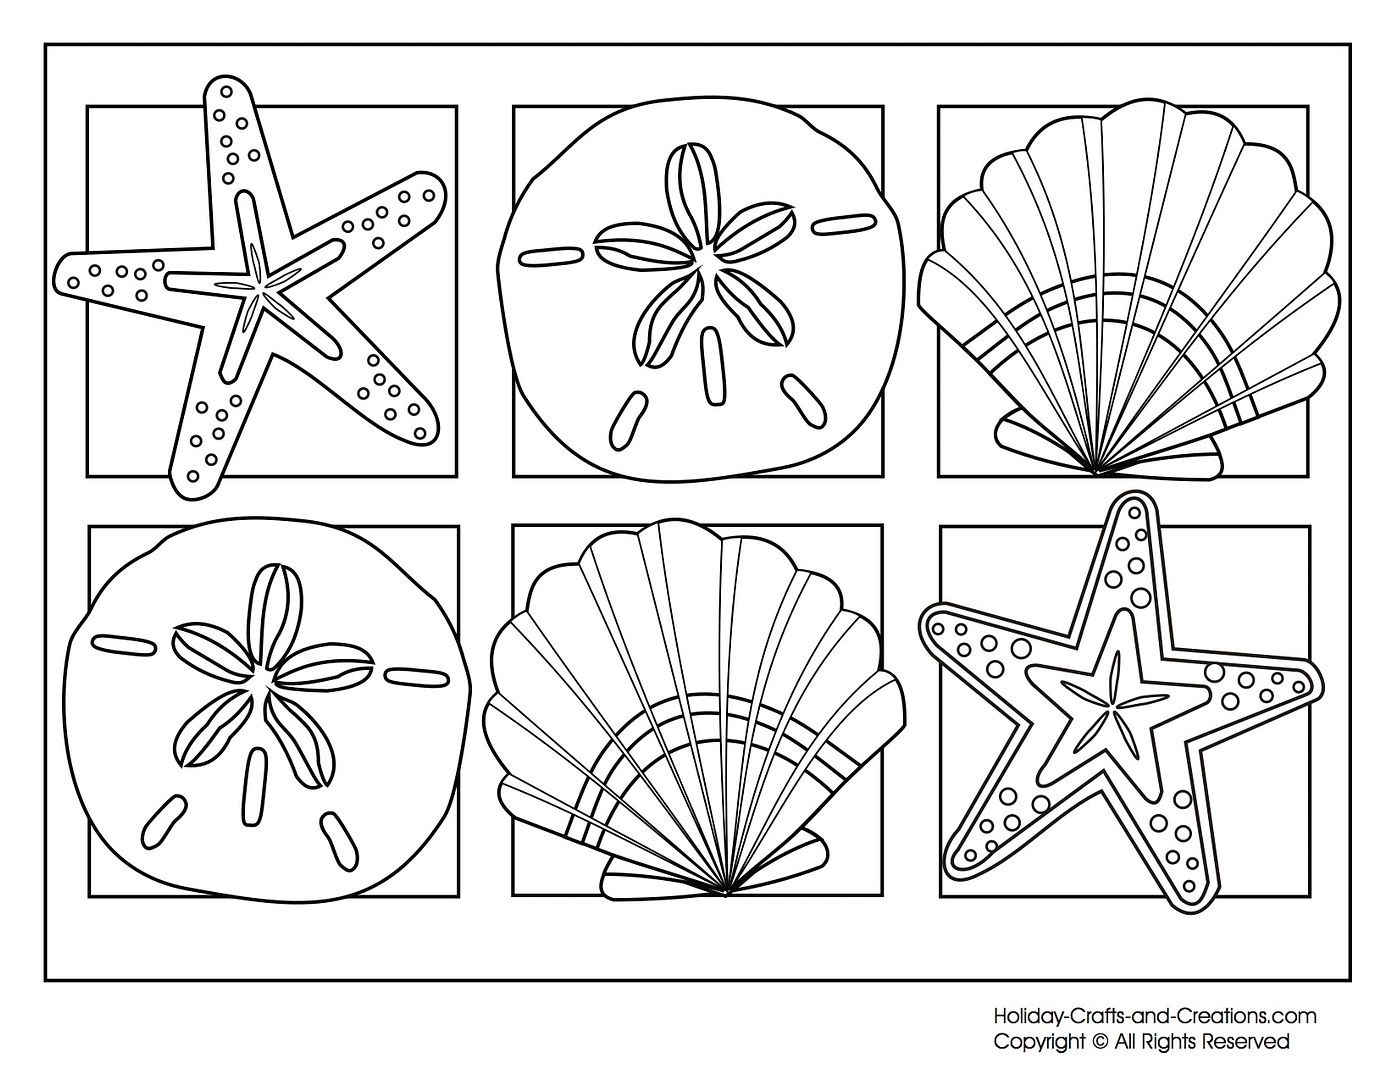 Free printable summer coloring pages: 6 seashells 